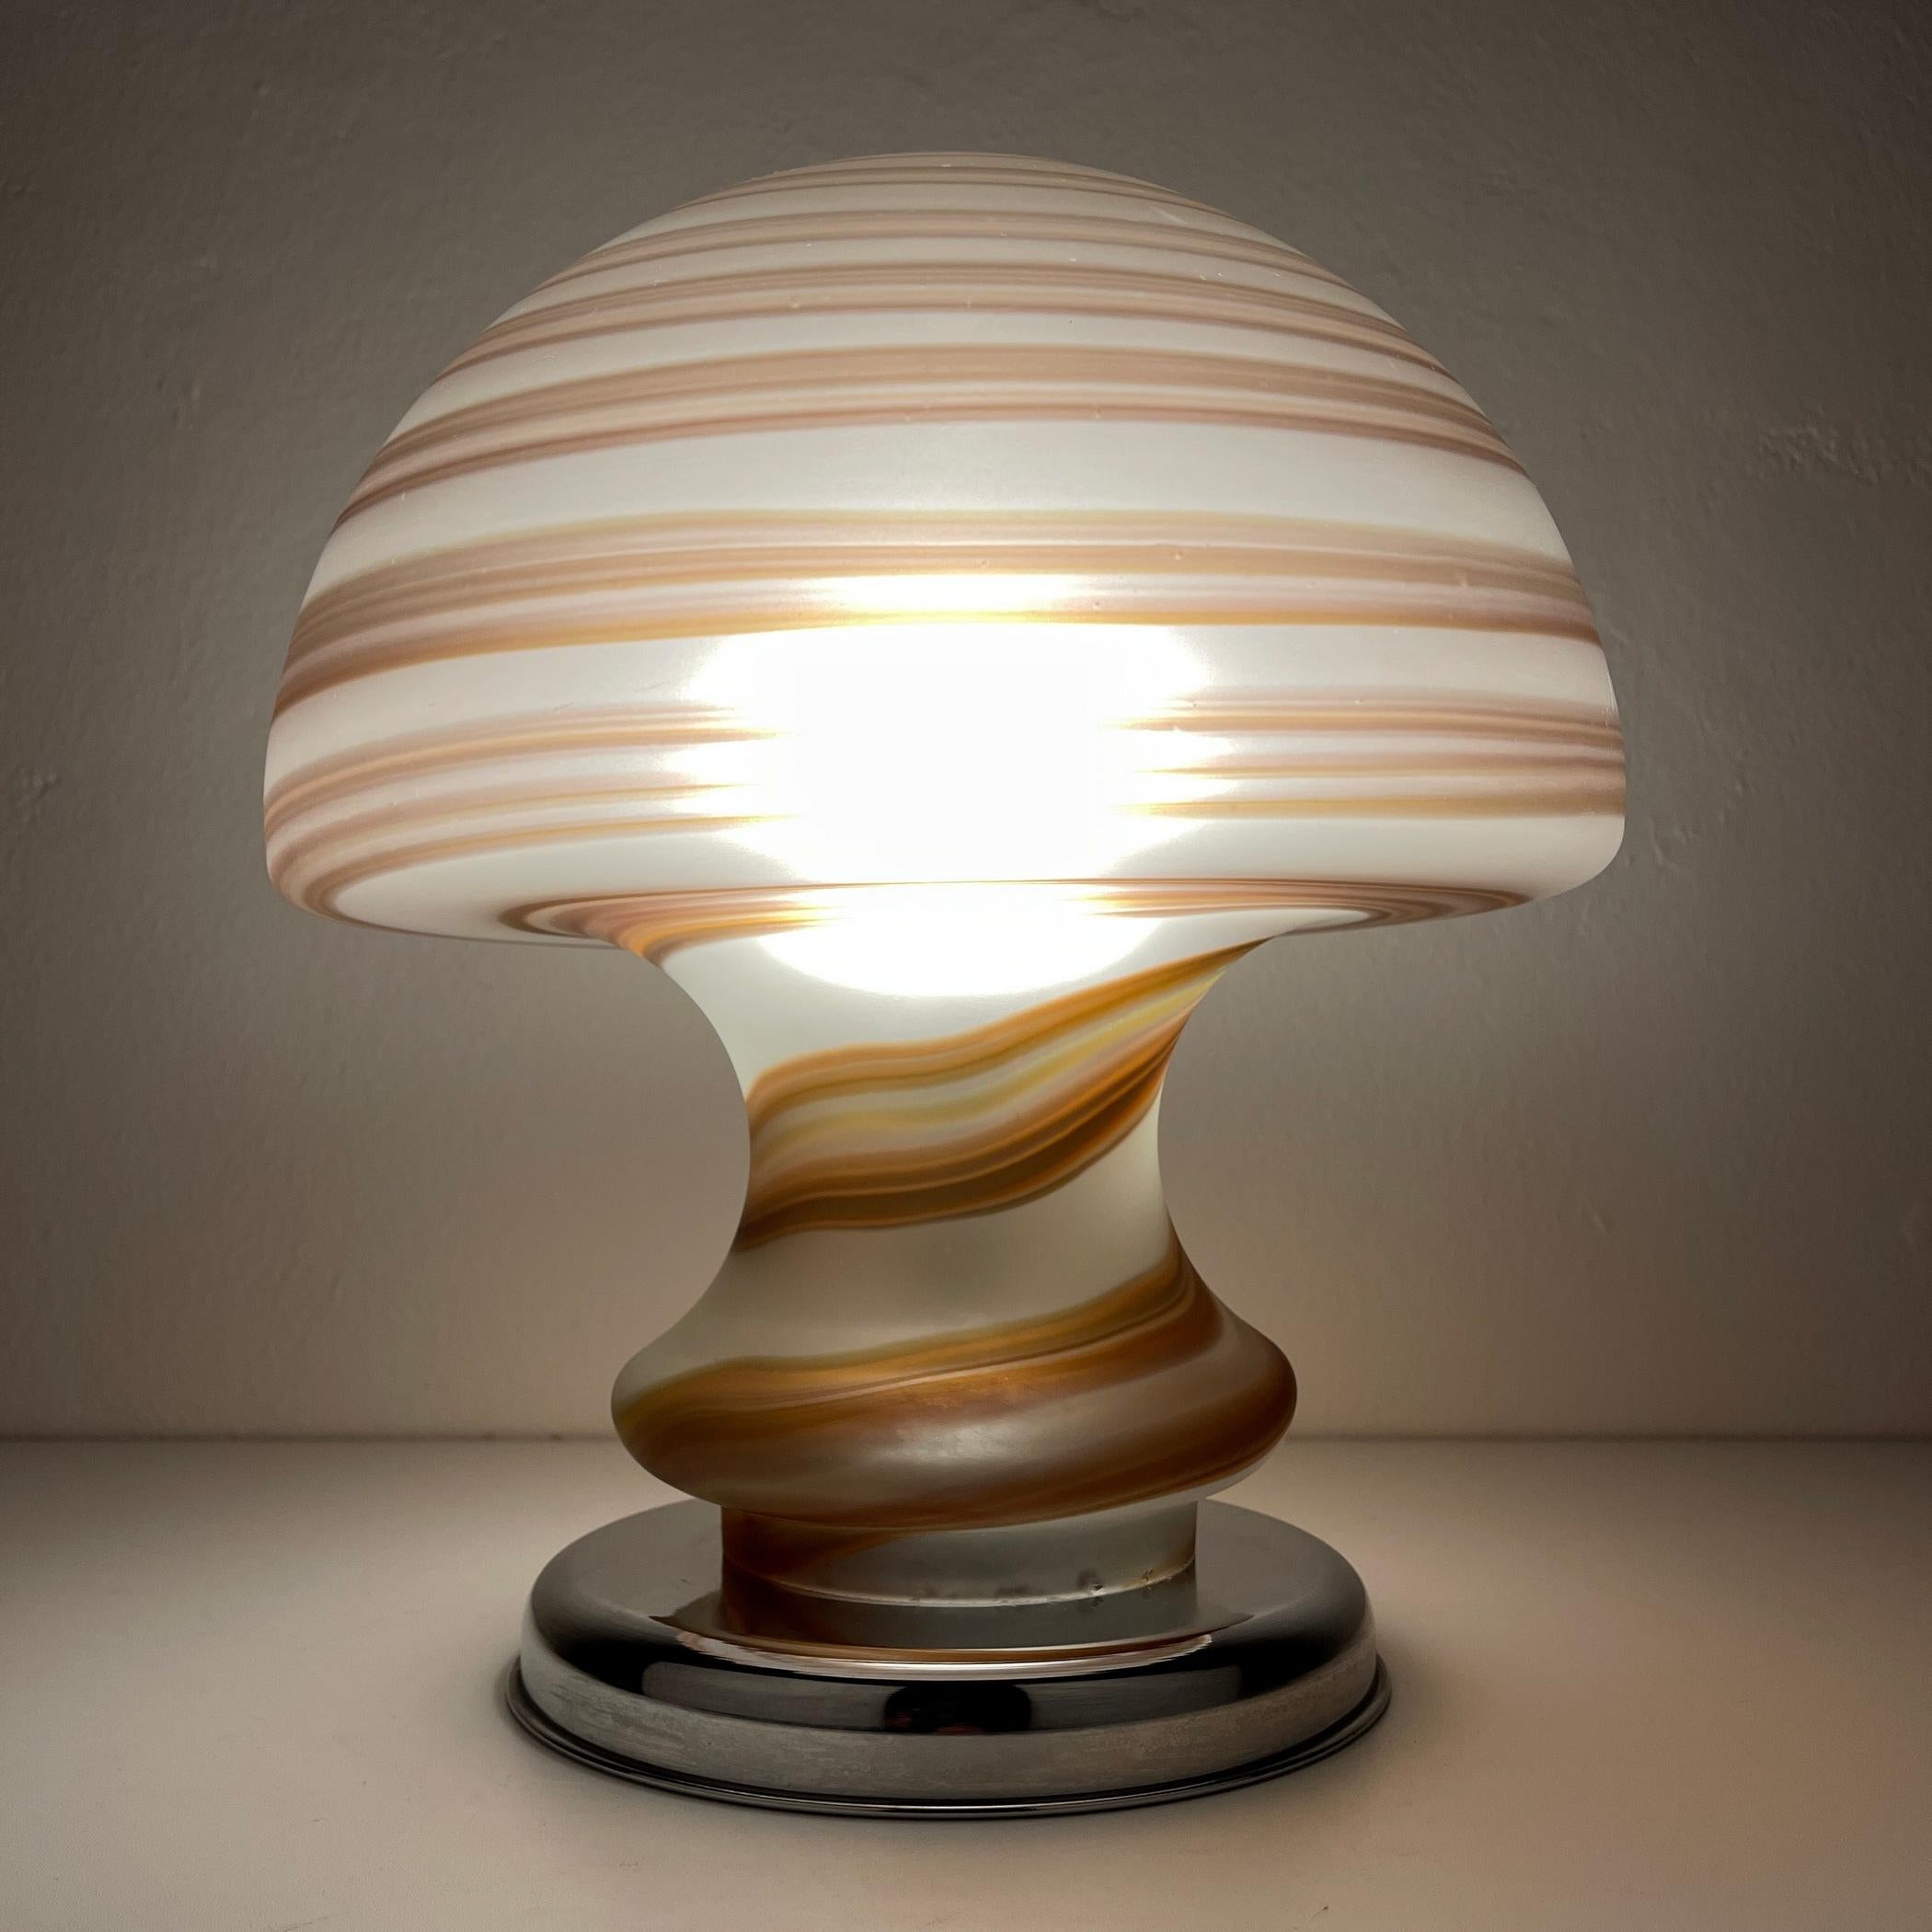 The mushroom swirl Murano glass table lamp made in Italy in the 1970s.
The lamp is suited for regular E14 light bulb and, suited for both 110V and 220V grids. It has an EU-spec plug. Cable length 135 cm. Wiring replaced by a professional